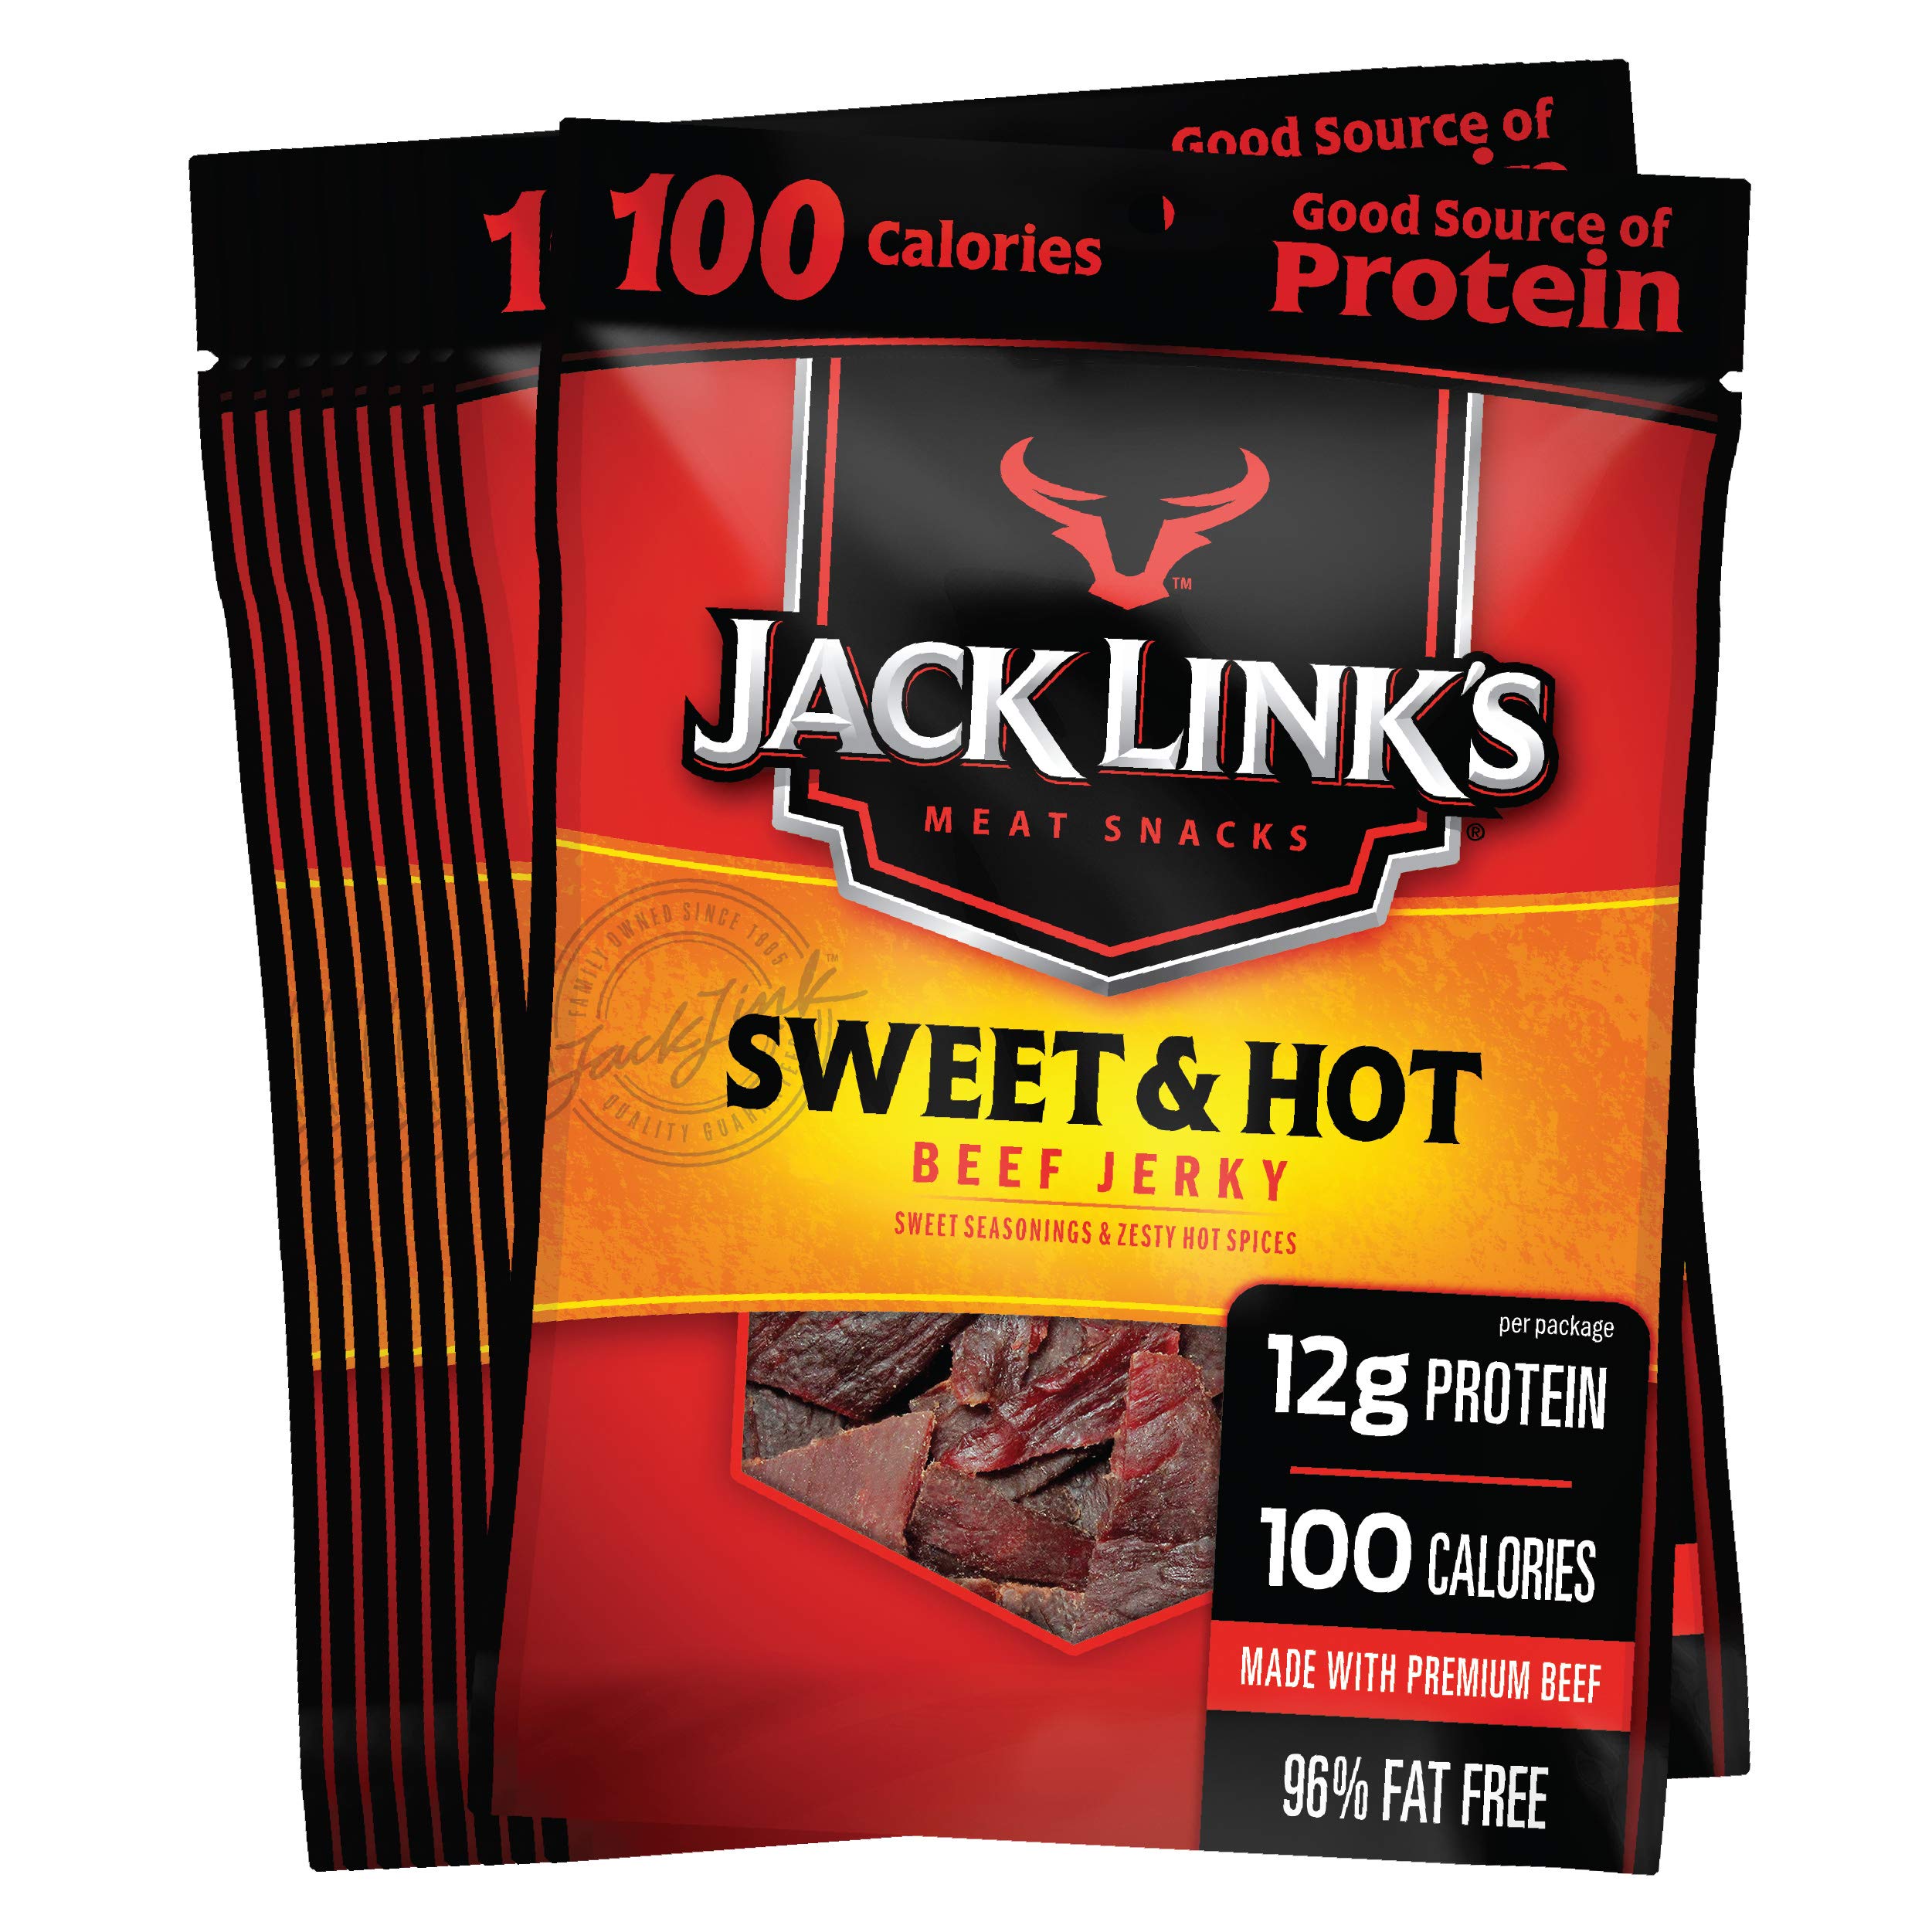 Huge 30 Pound Bag of Beef Jerky Is Here! It's April Fools', but real!